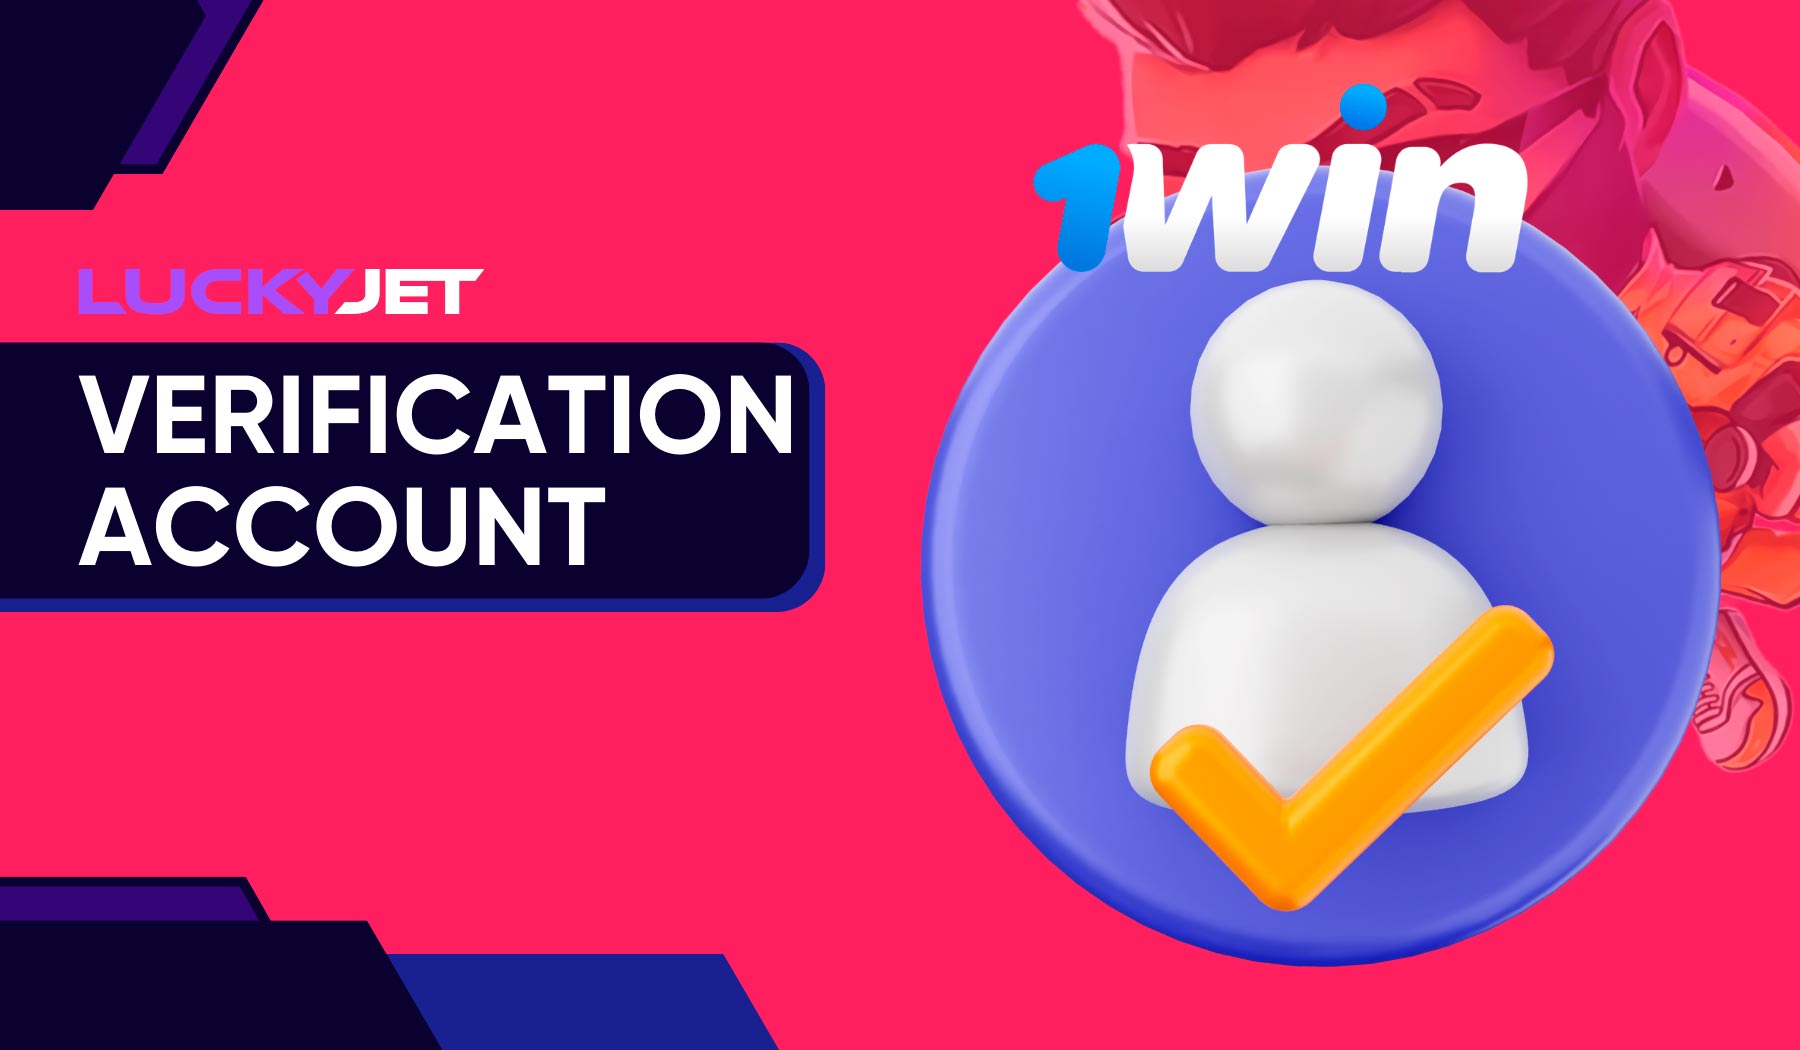 At Lucky Jet on the 1win platform, the account verification process